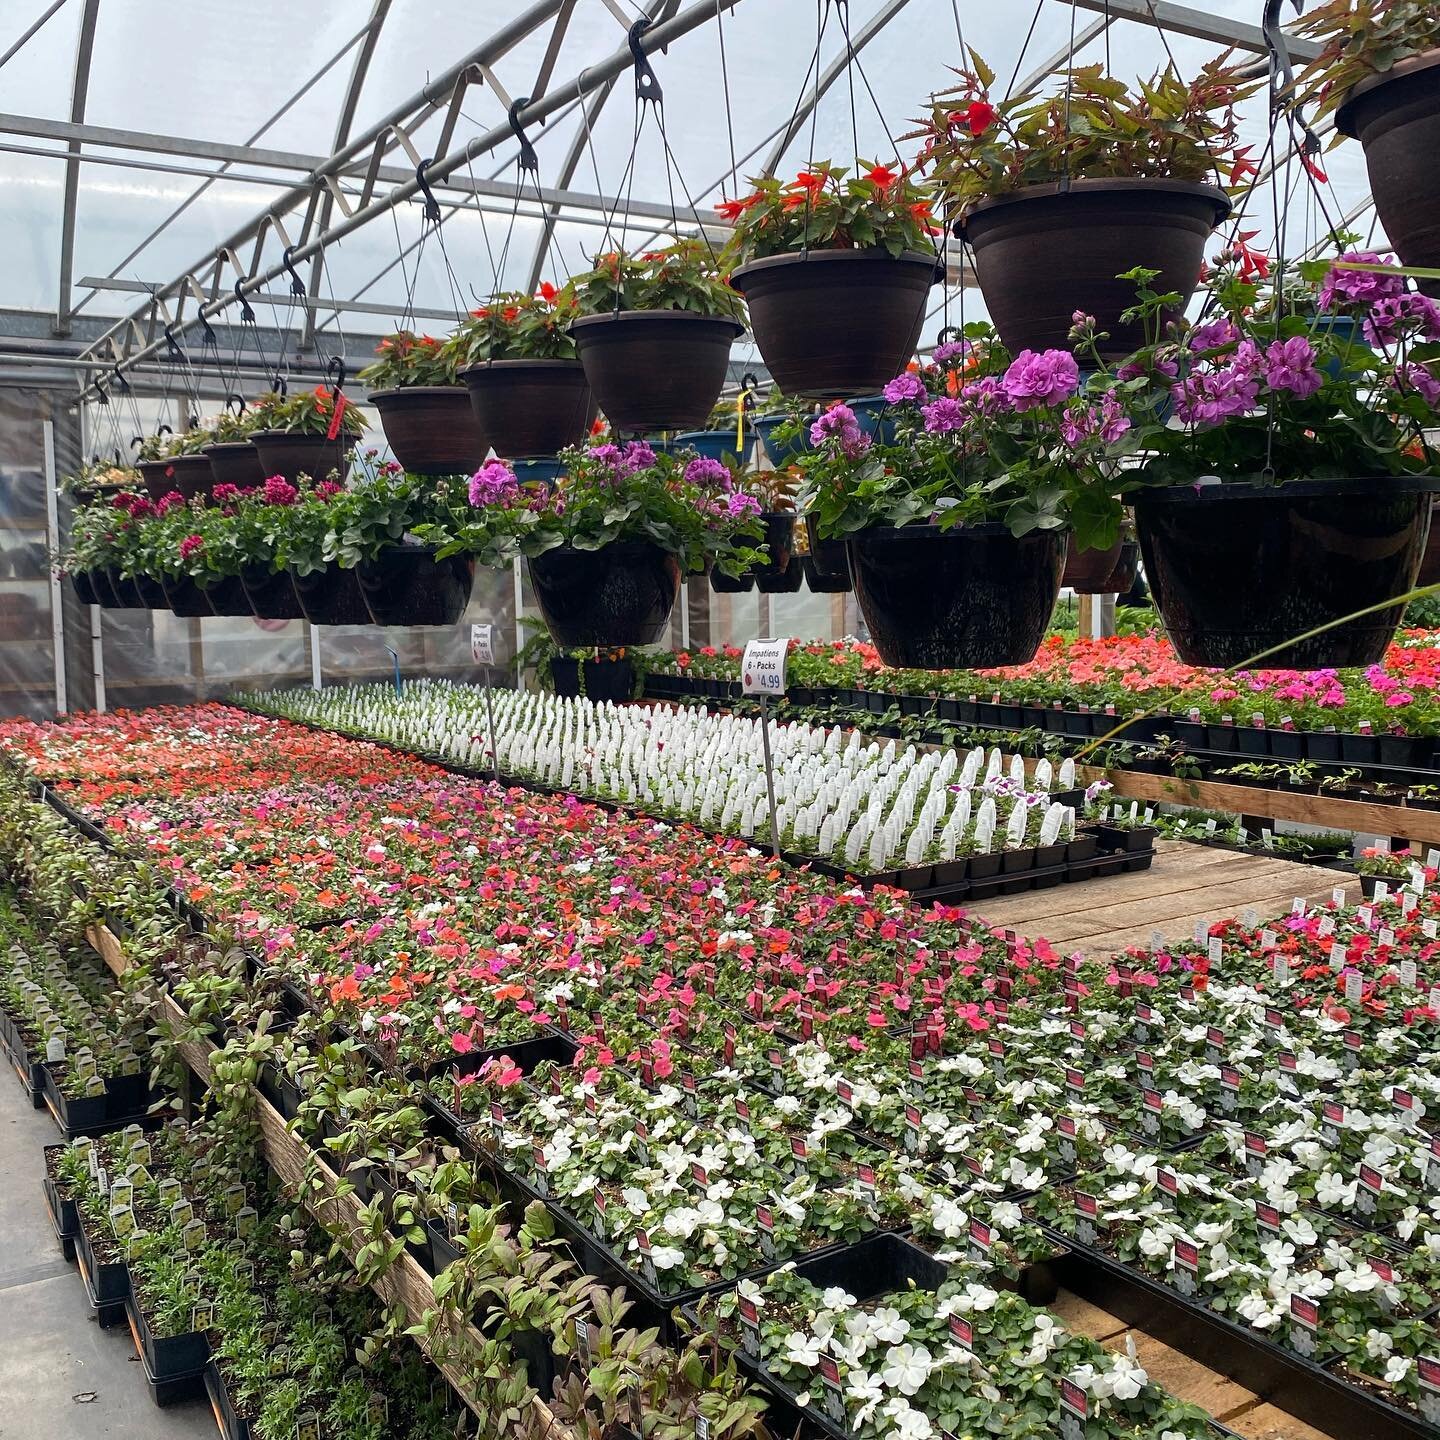 Checked out @doornsgreenhouse today. Amazing selection, friendly staff and great prices. We found everything we were looking for and more. 🪴🌸 If you haven&rsquo;t had a chance to check them out this season, we highly recommend!